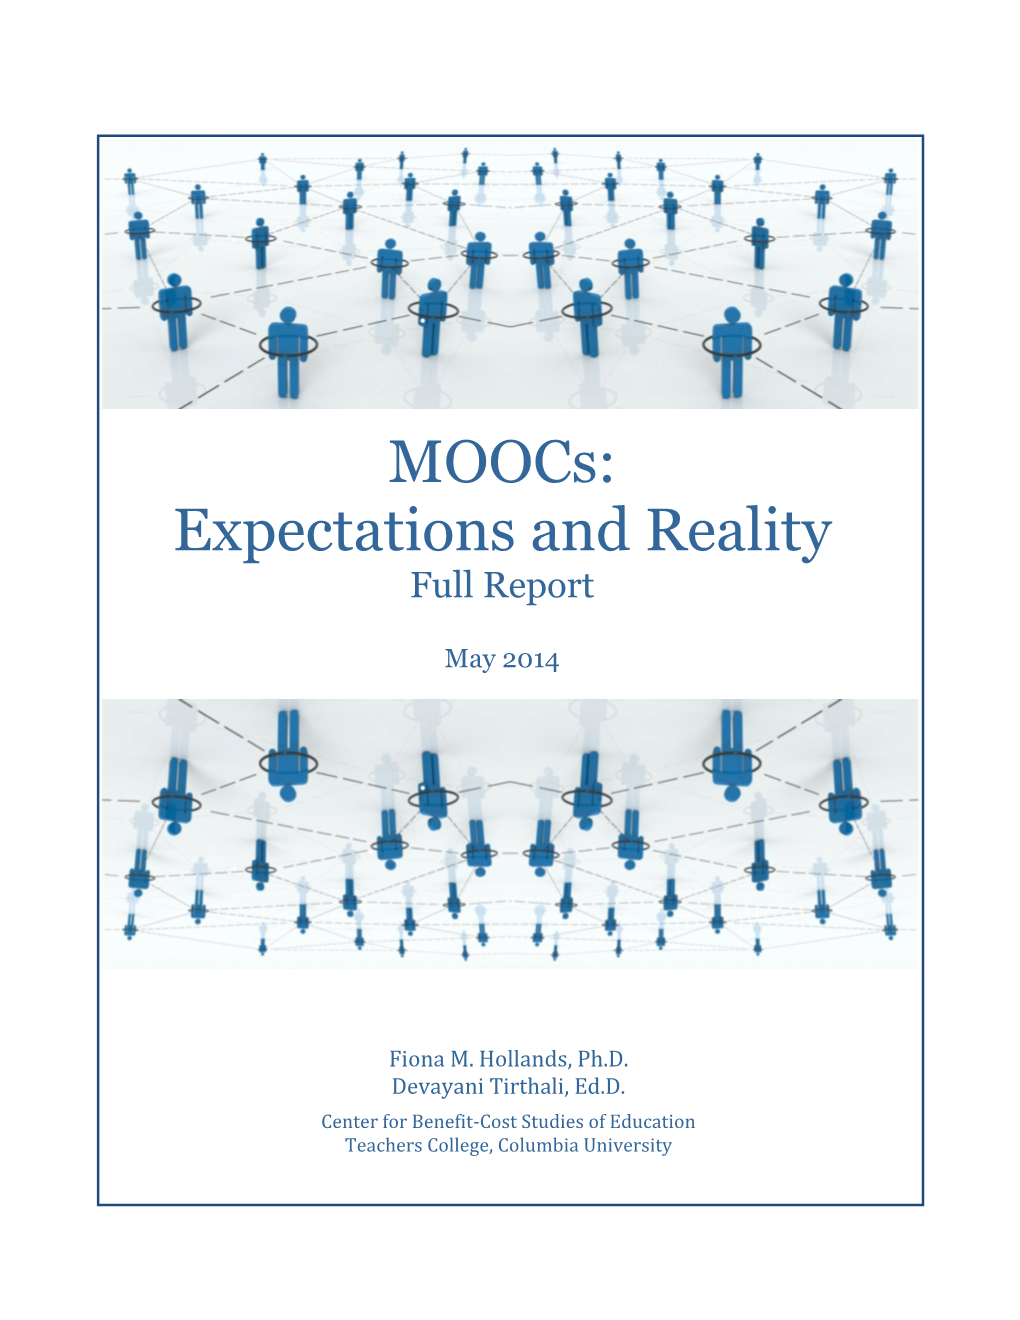 Moocs: Expectations and Reality. Full Report